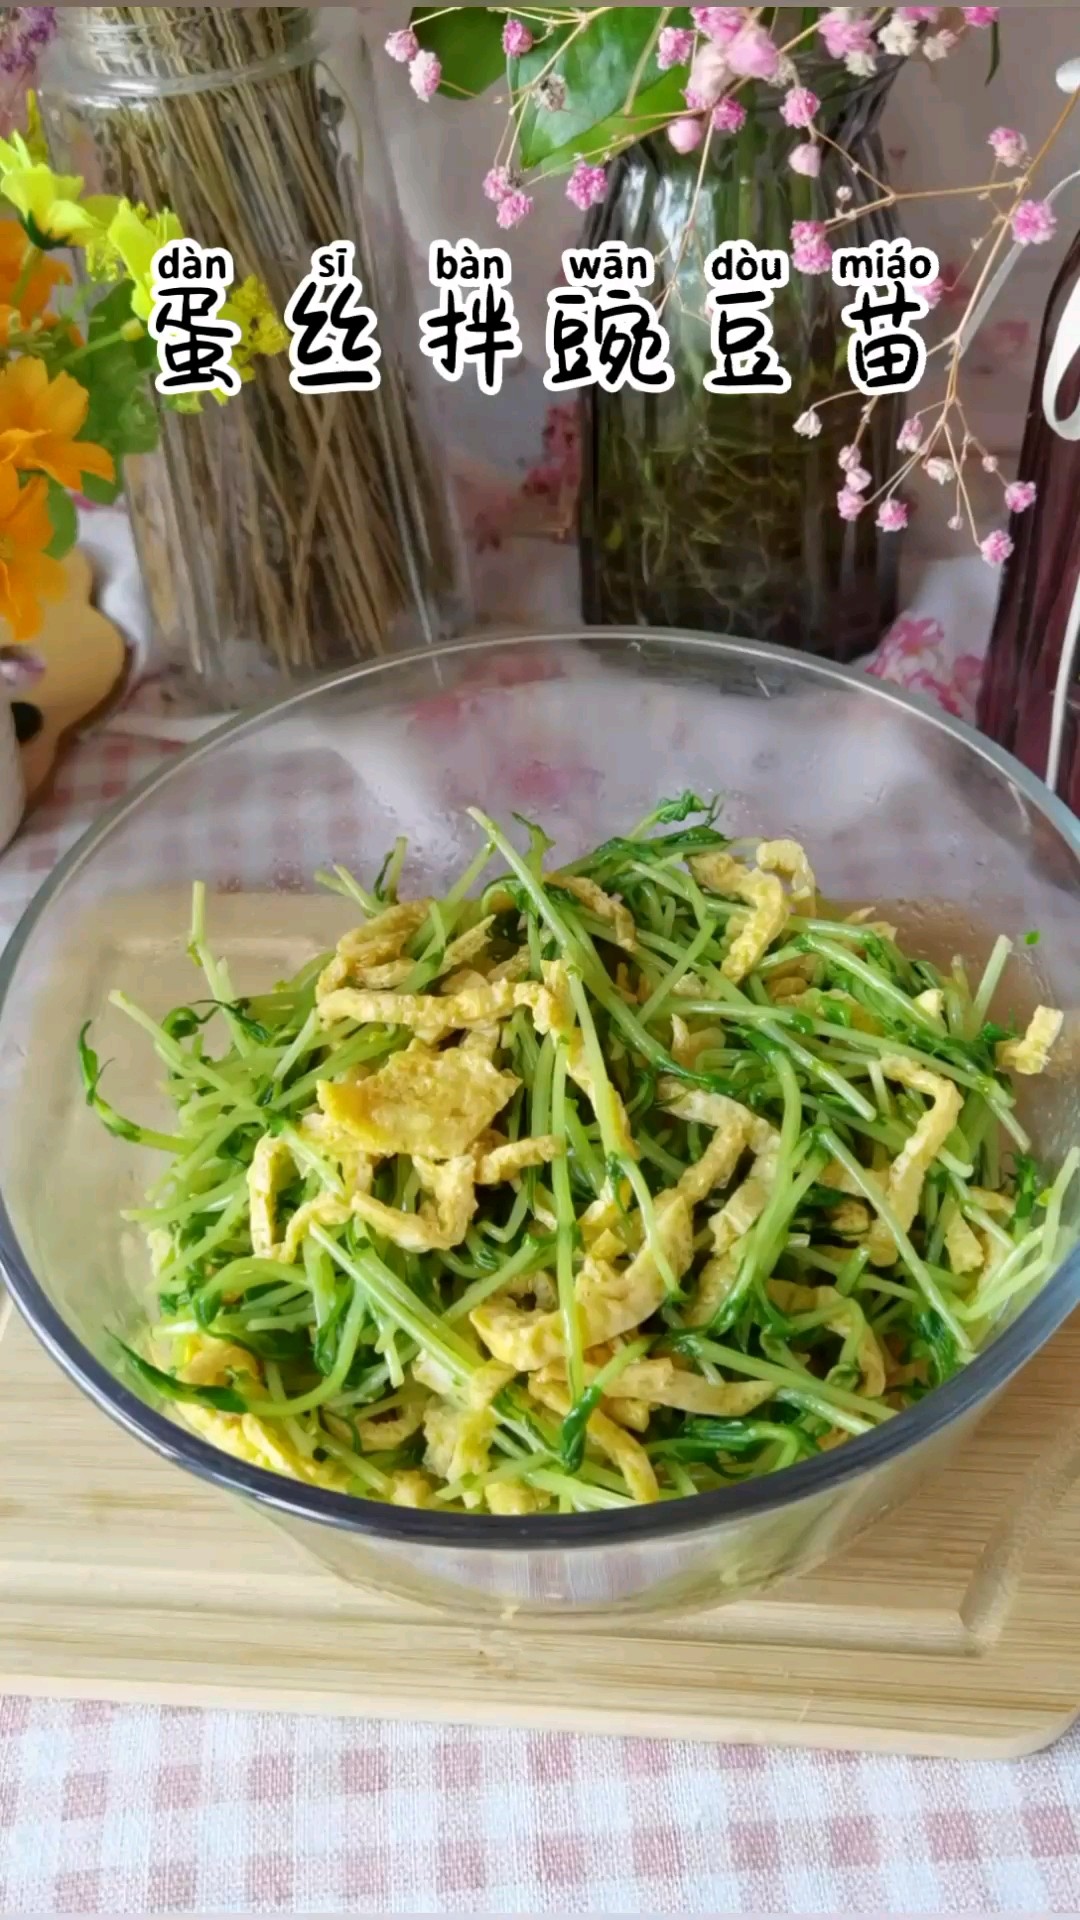 Pea Sprouts Mixed with Egg Shreds